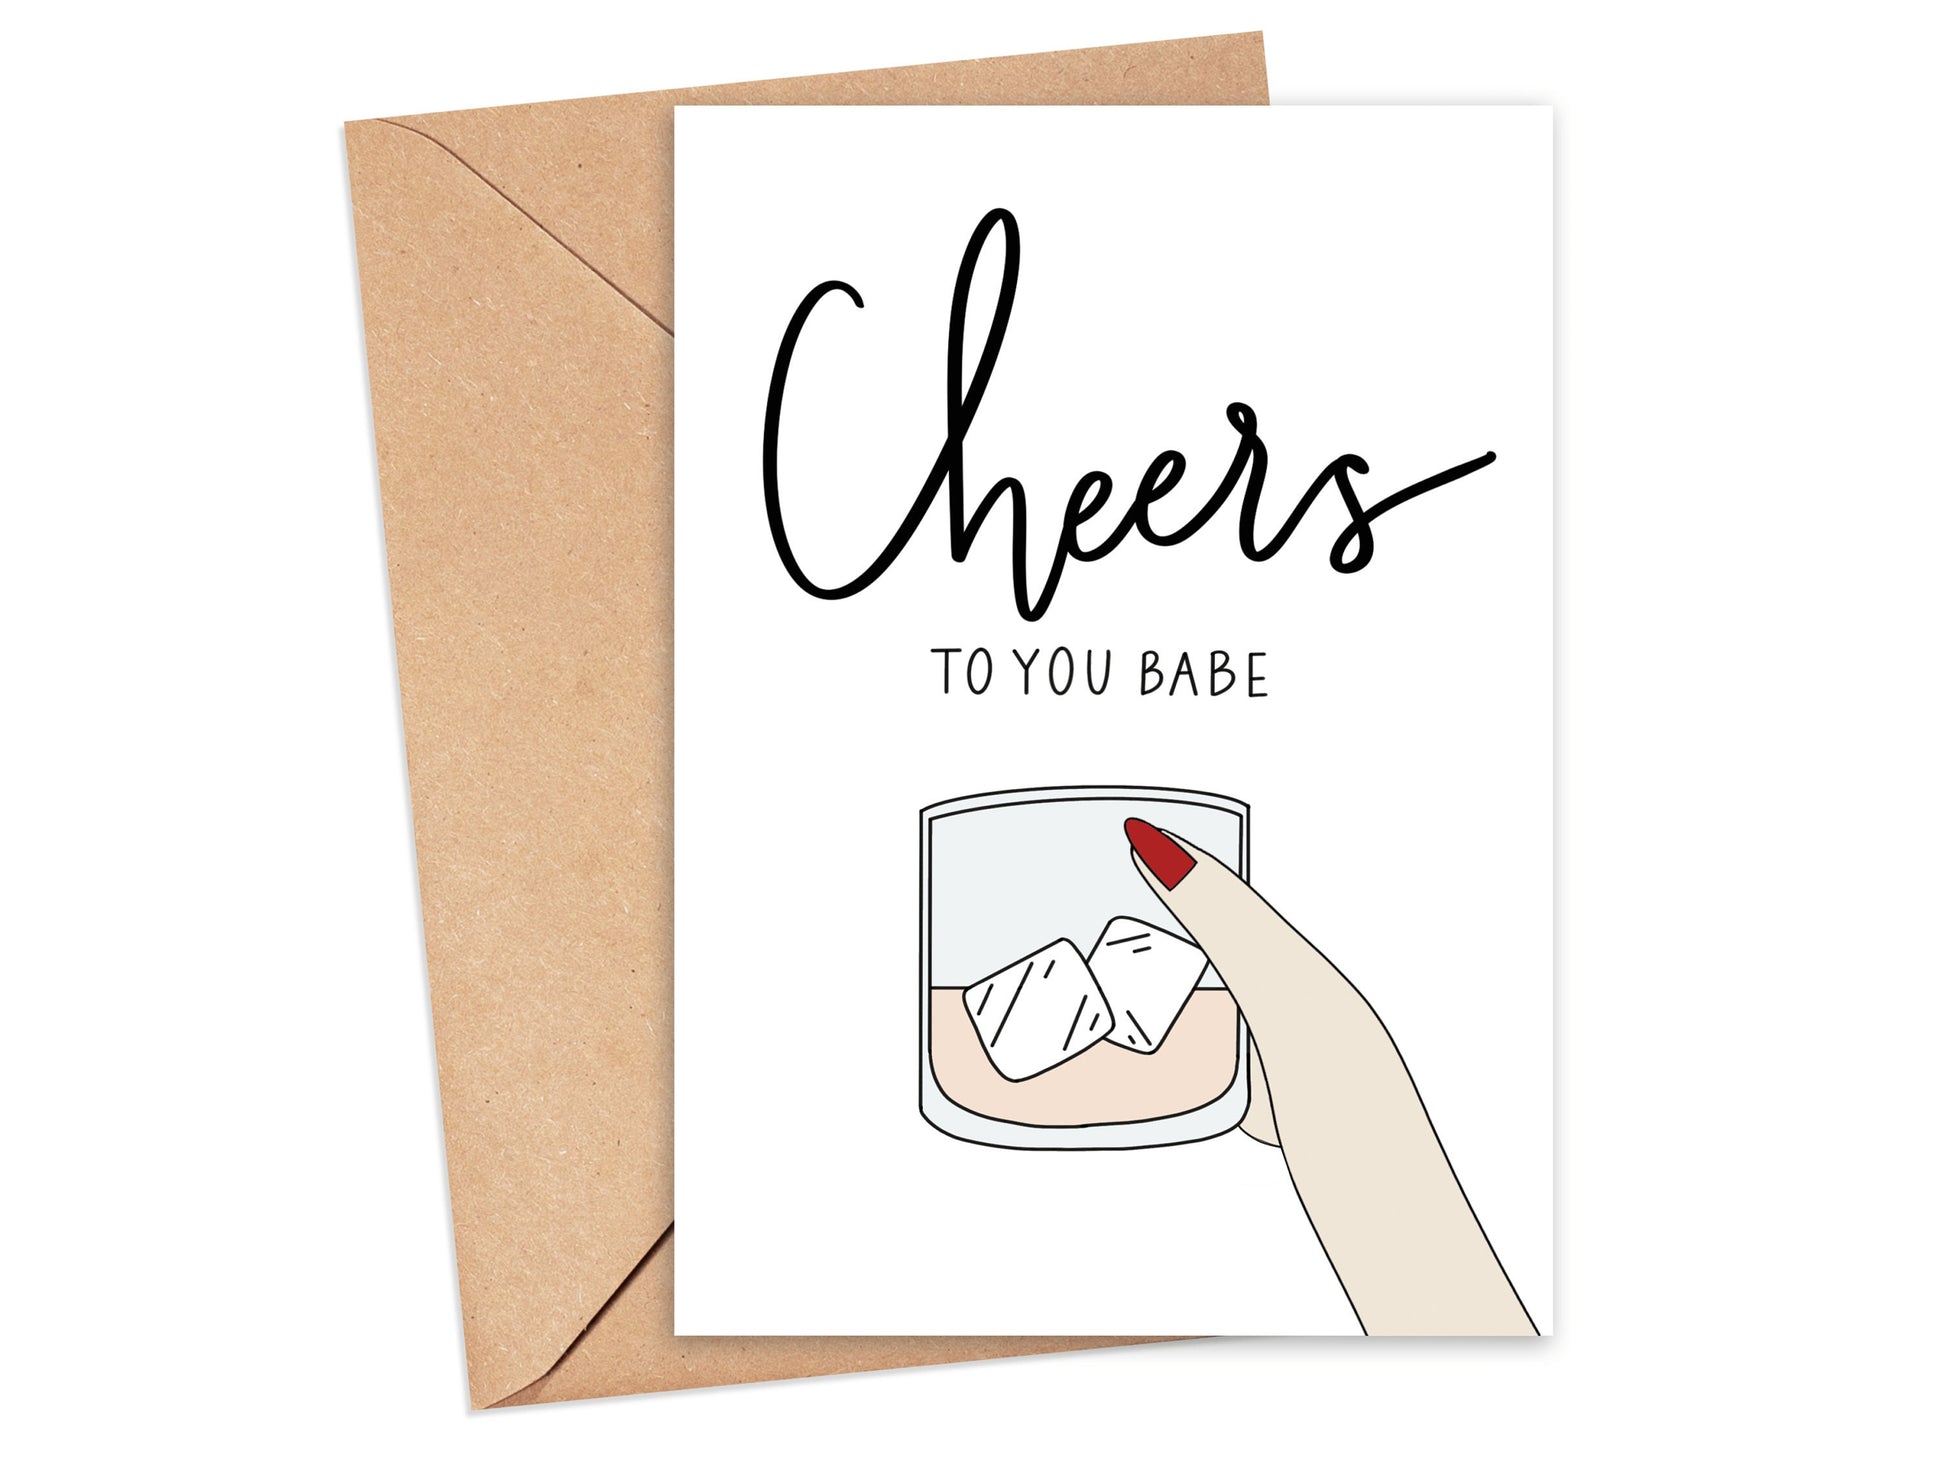 Cheers to You Babe Card Simply Happy Cards